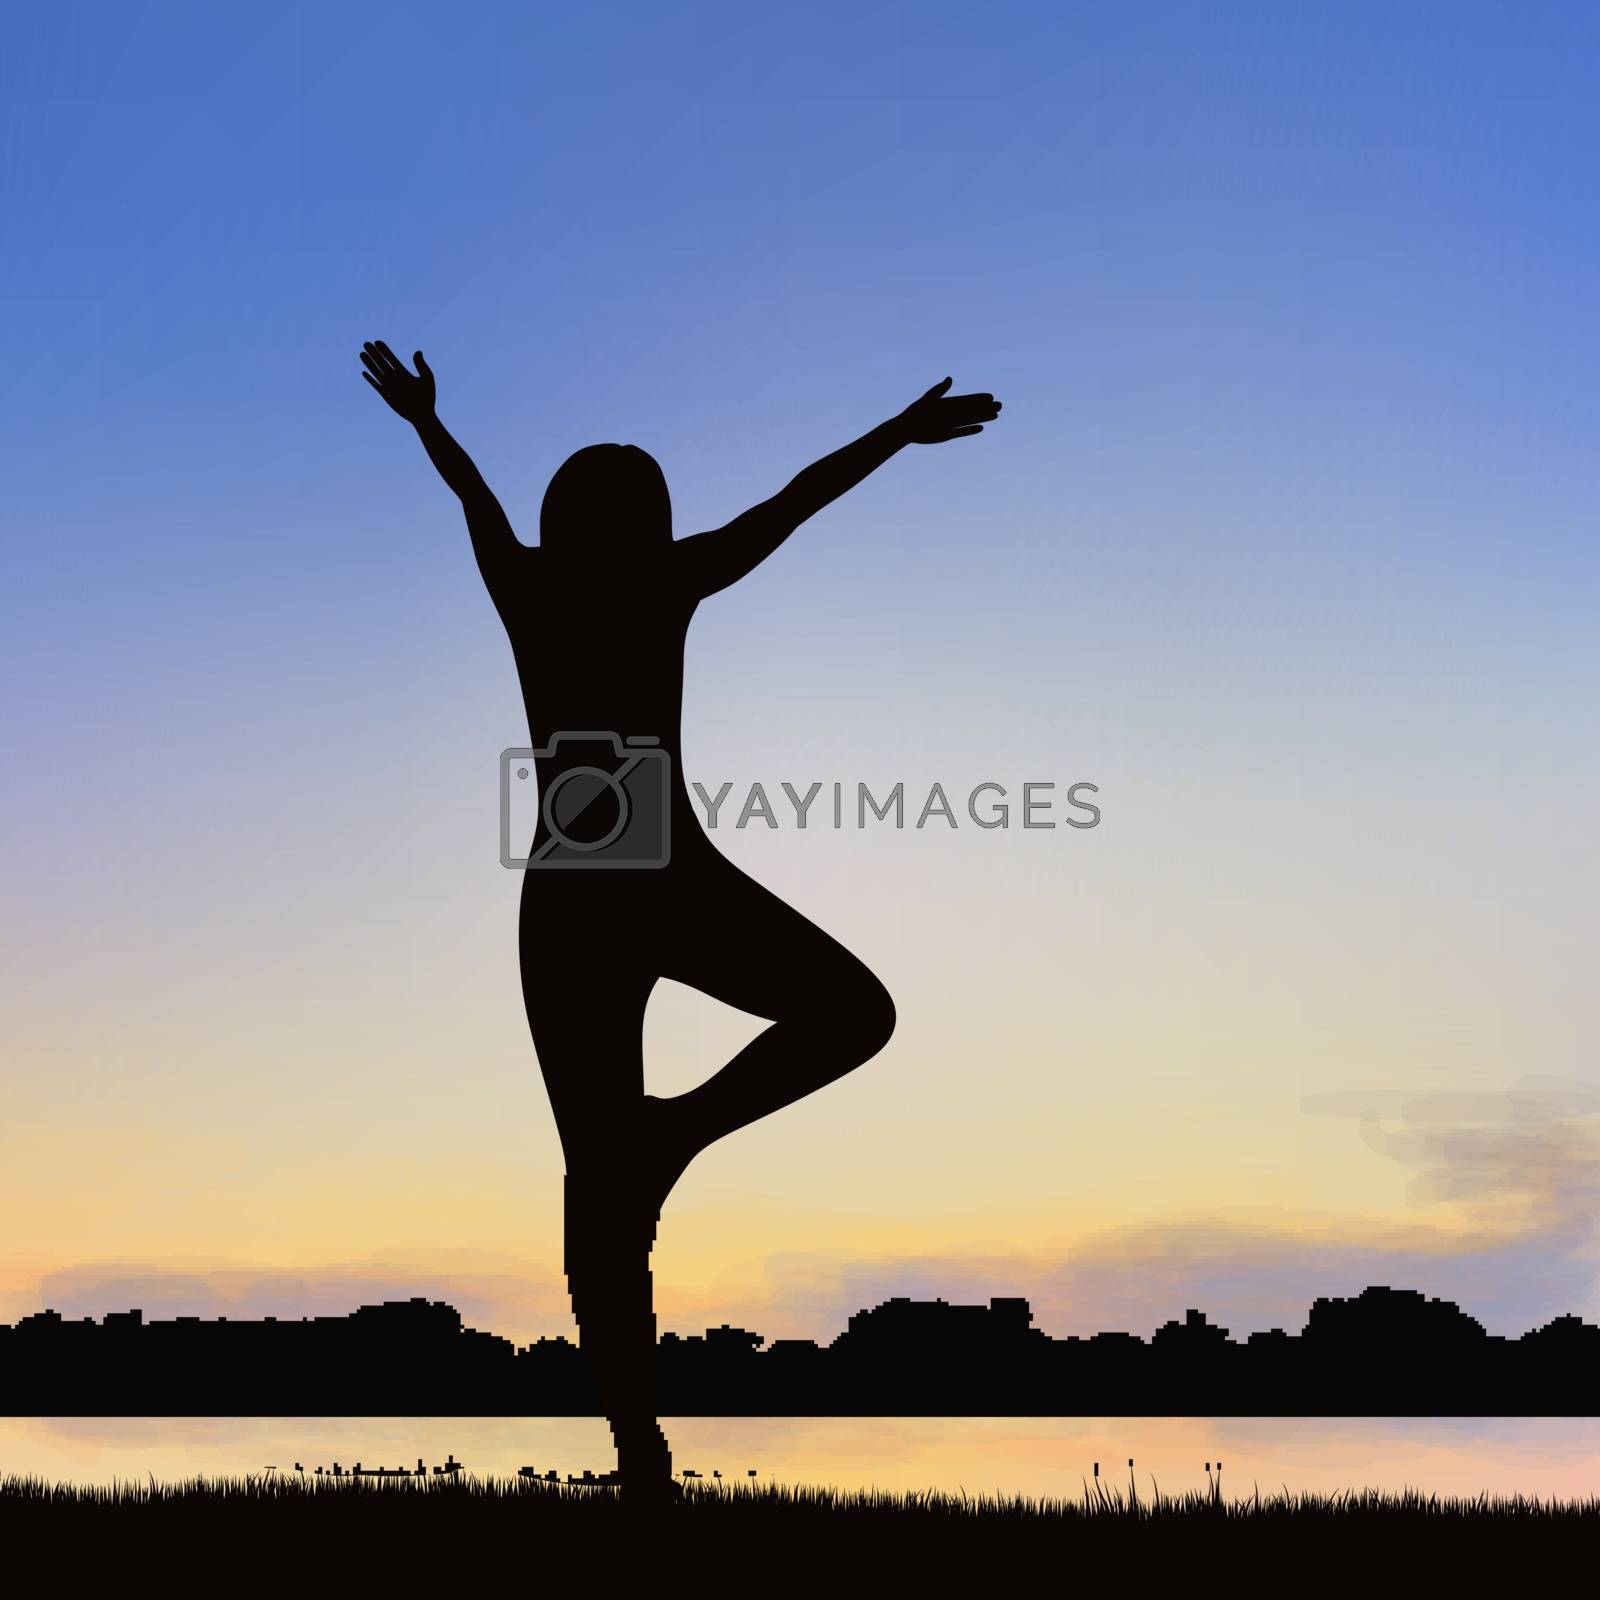 Royalty free image of Lady silhouette image in the posture of Yoga. by narinbg